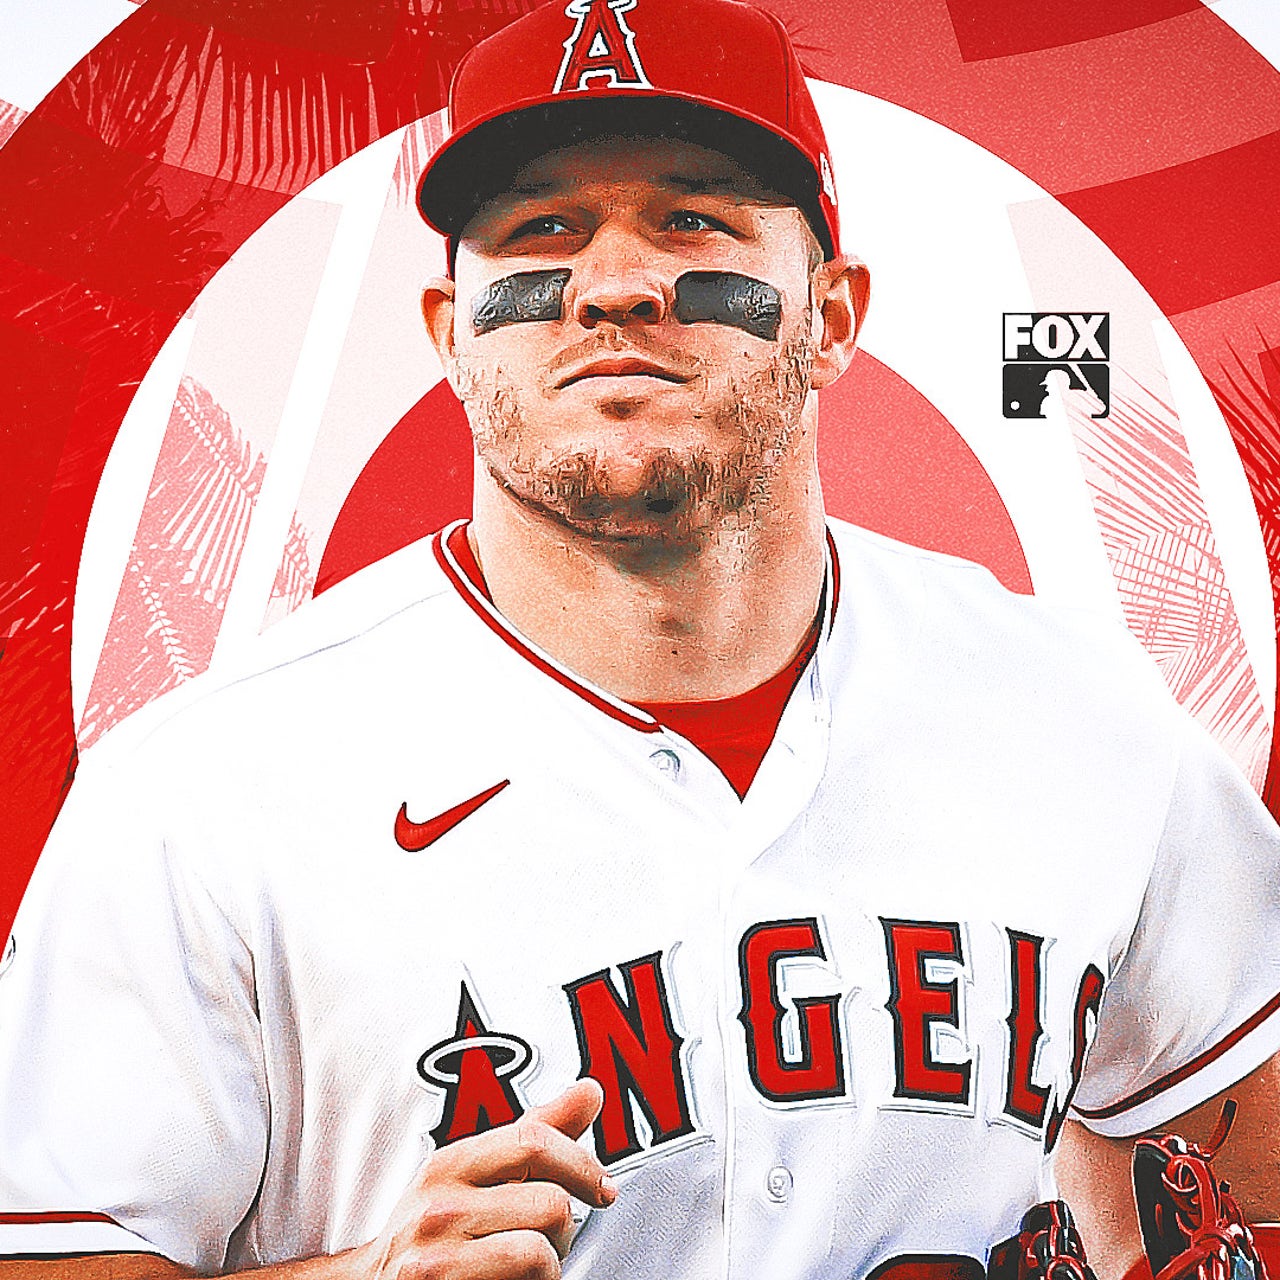 Mike Trout signed Angels color blast 8x10 photo